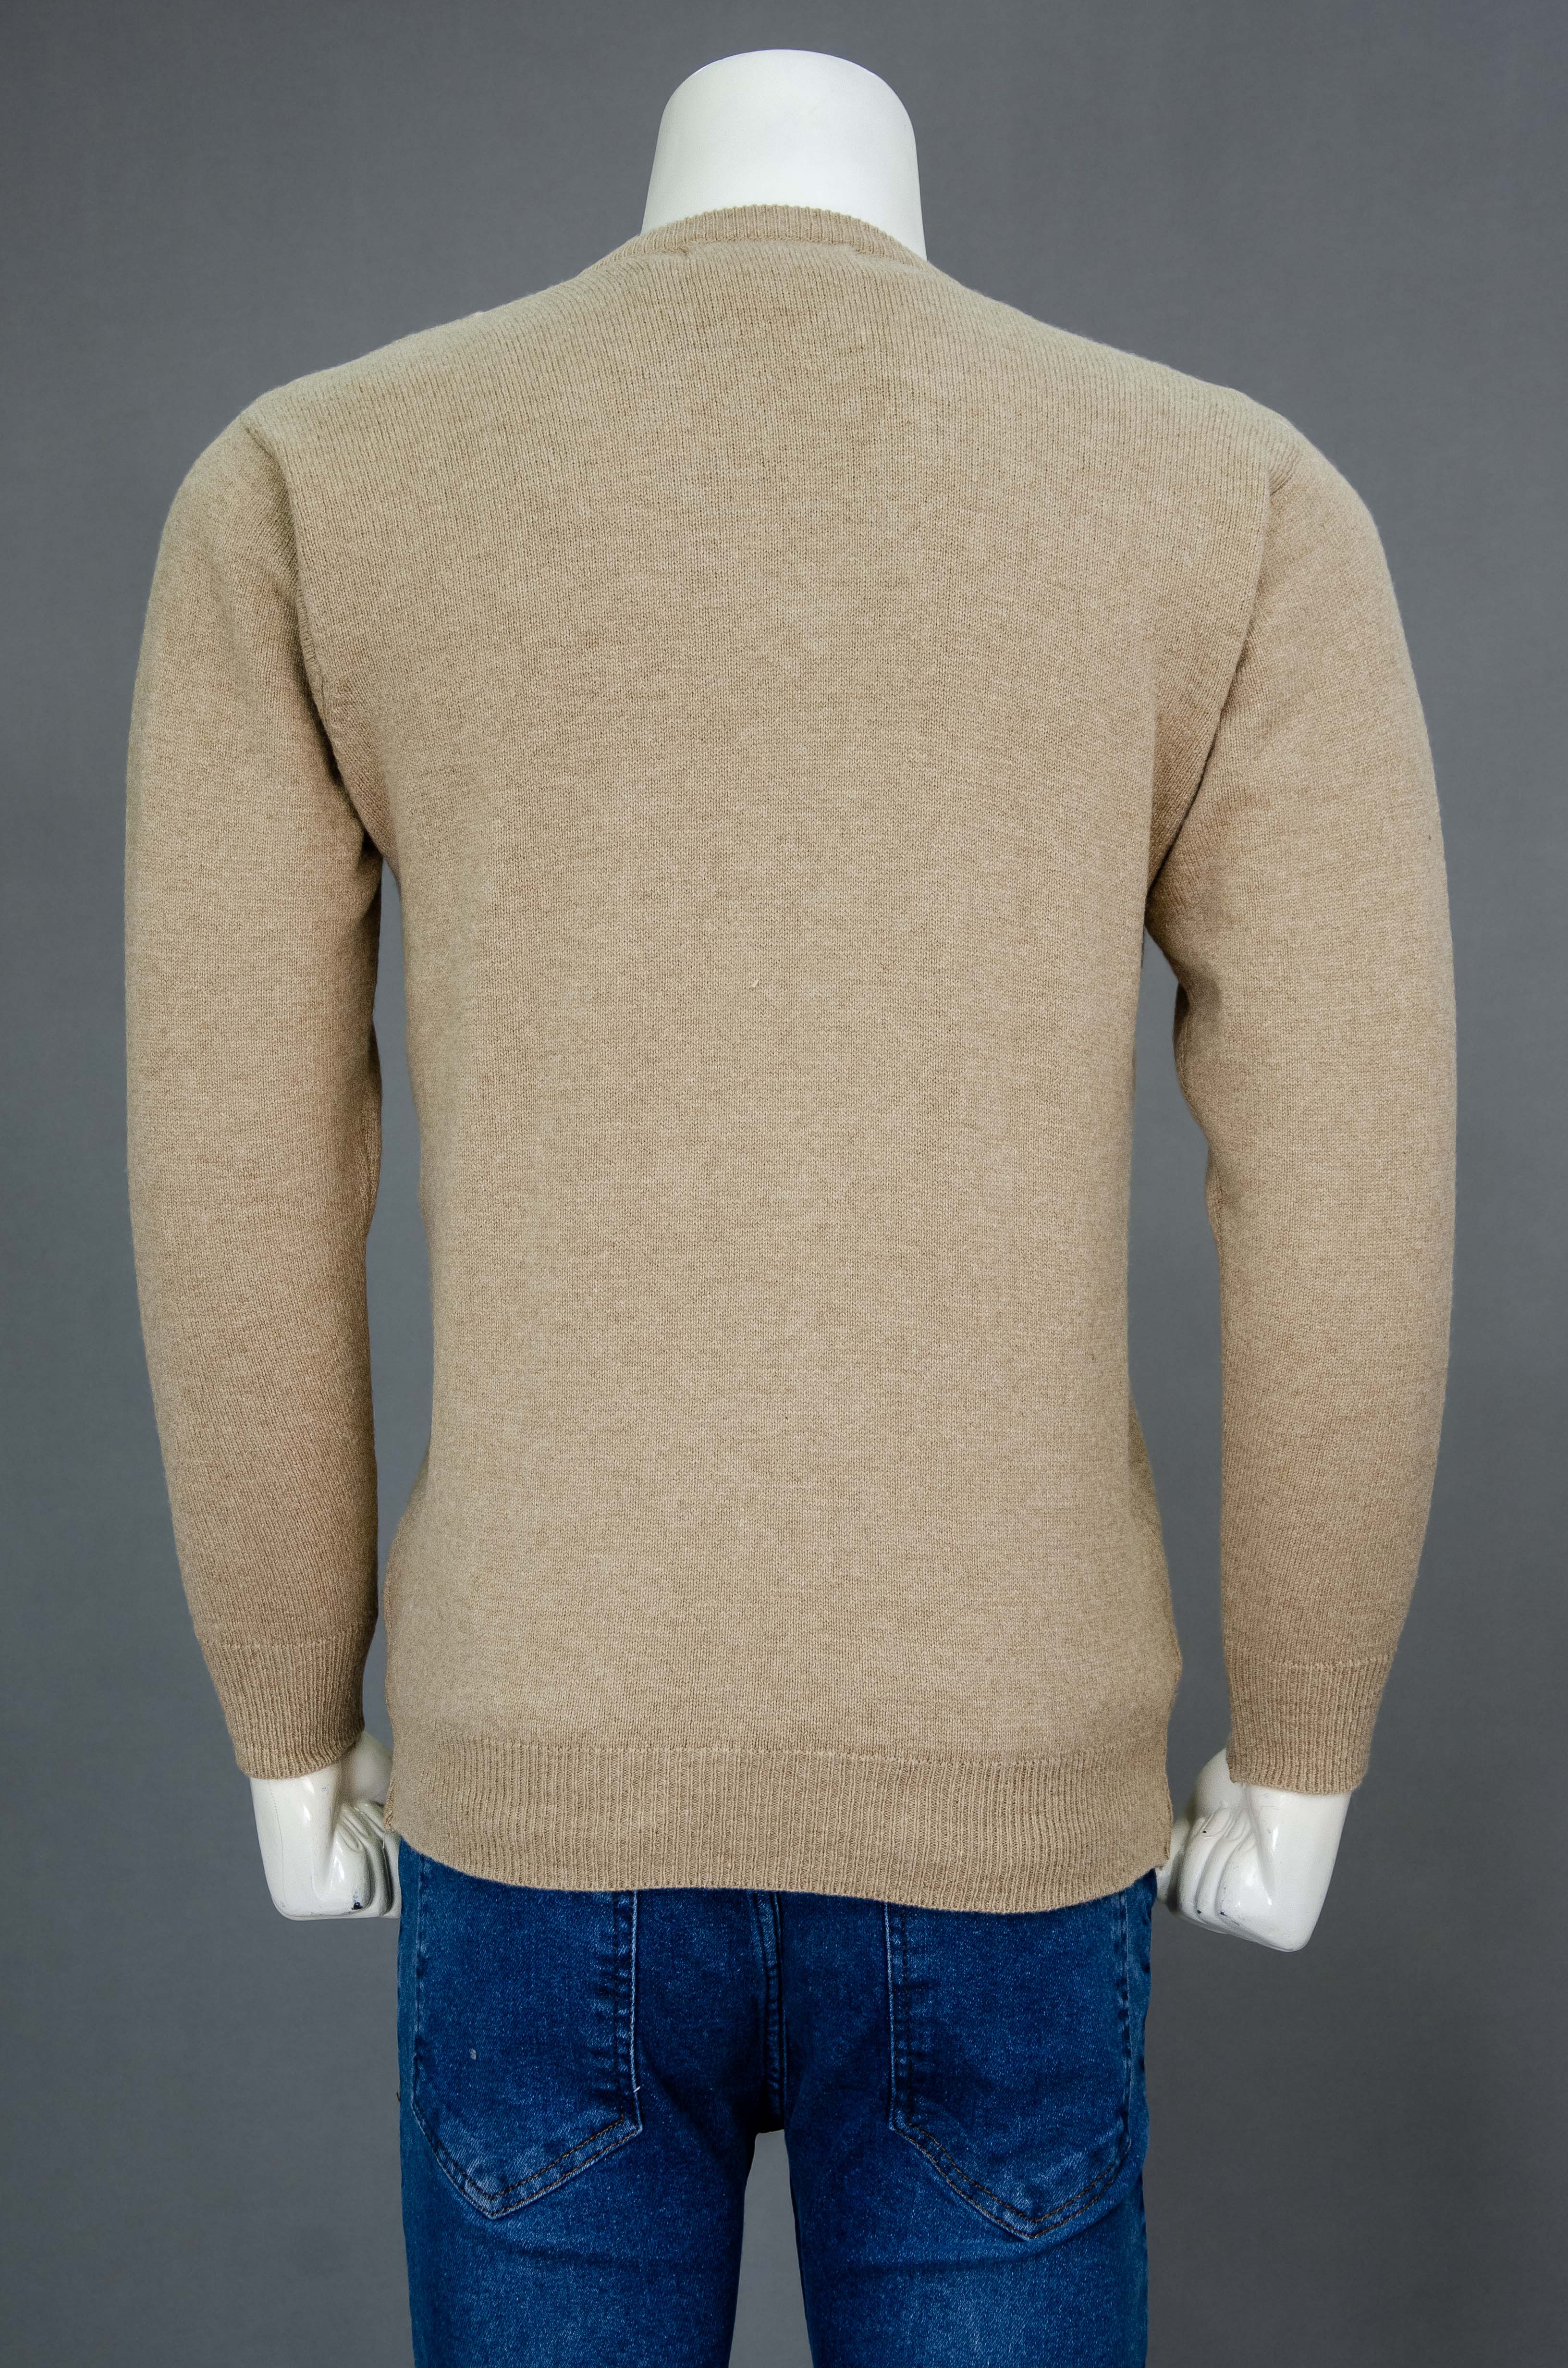 100% Lambswool Pullover